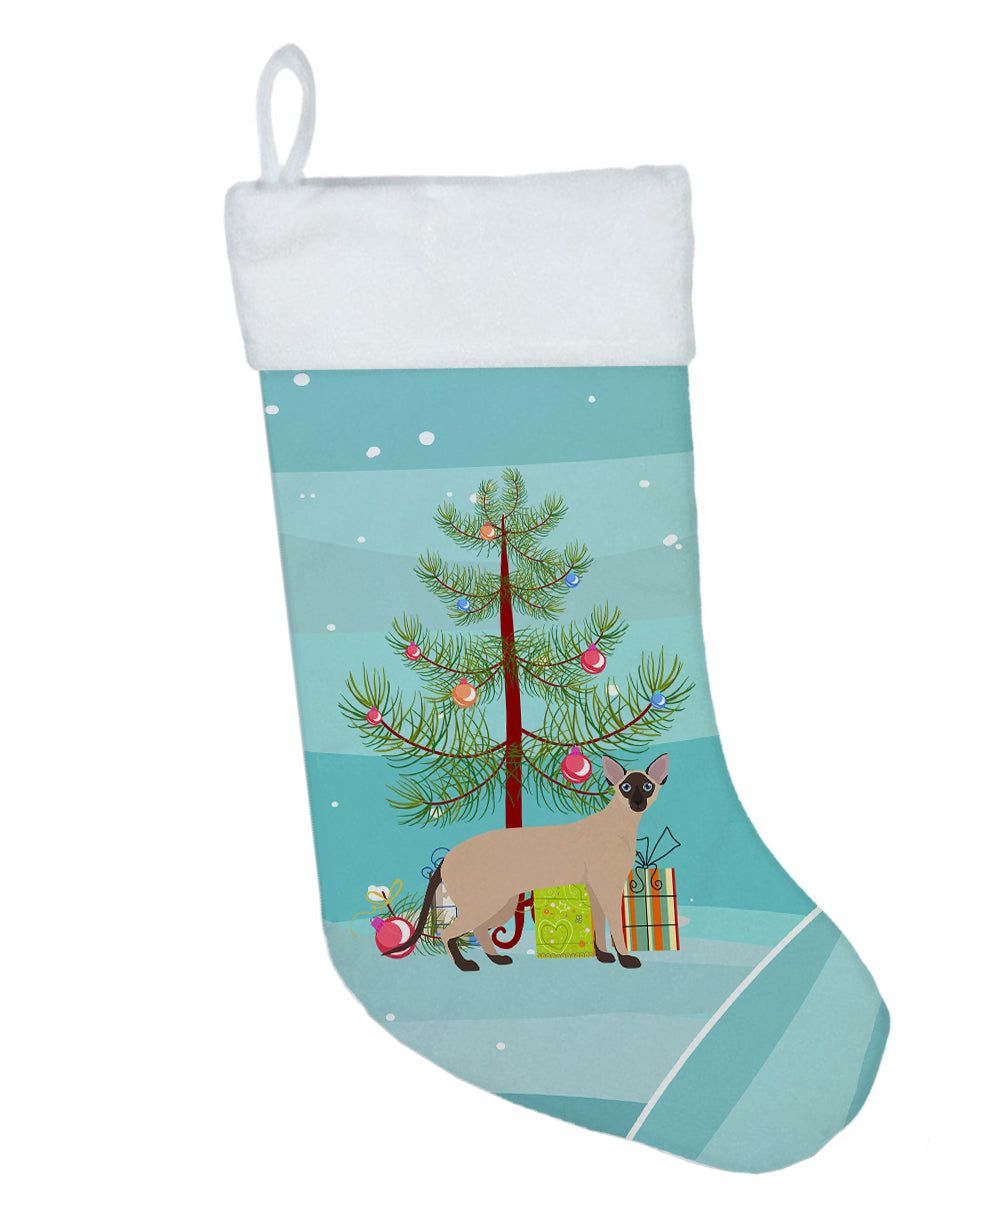 Colorpoint Shorthair #2 Cat Merry Christmas Christmas Stocking